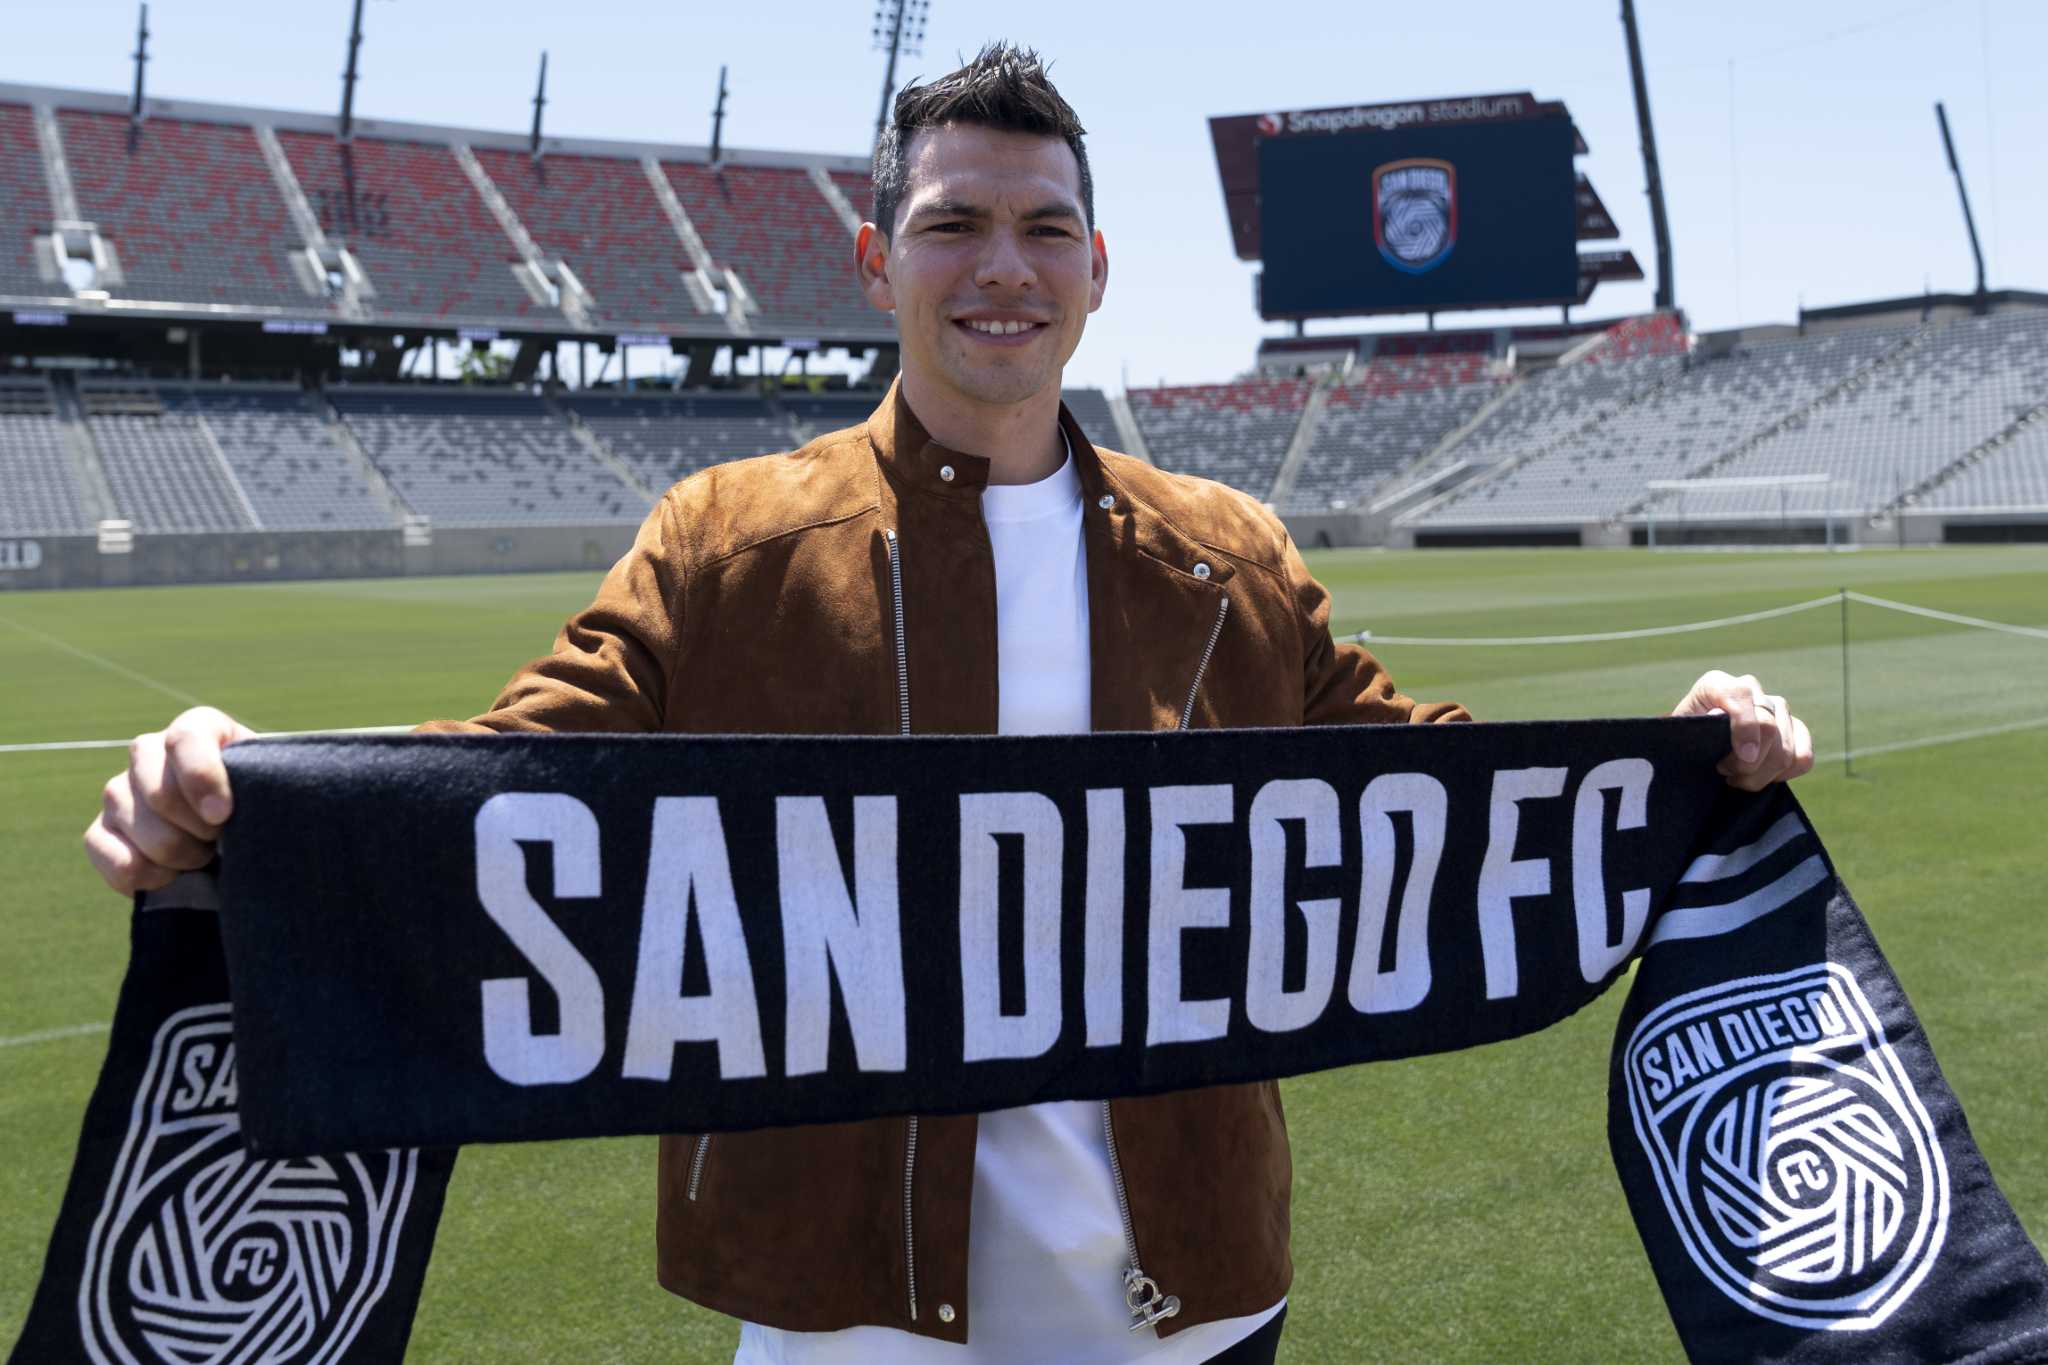 DirecTV signs multiyear deal as kit sponsor for the MLS expansion San Diego FC